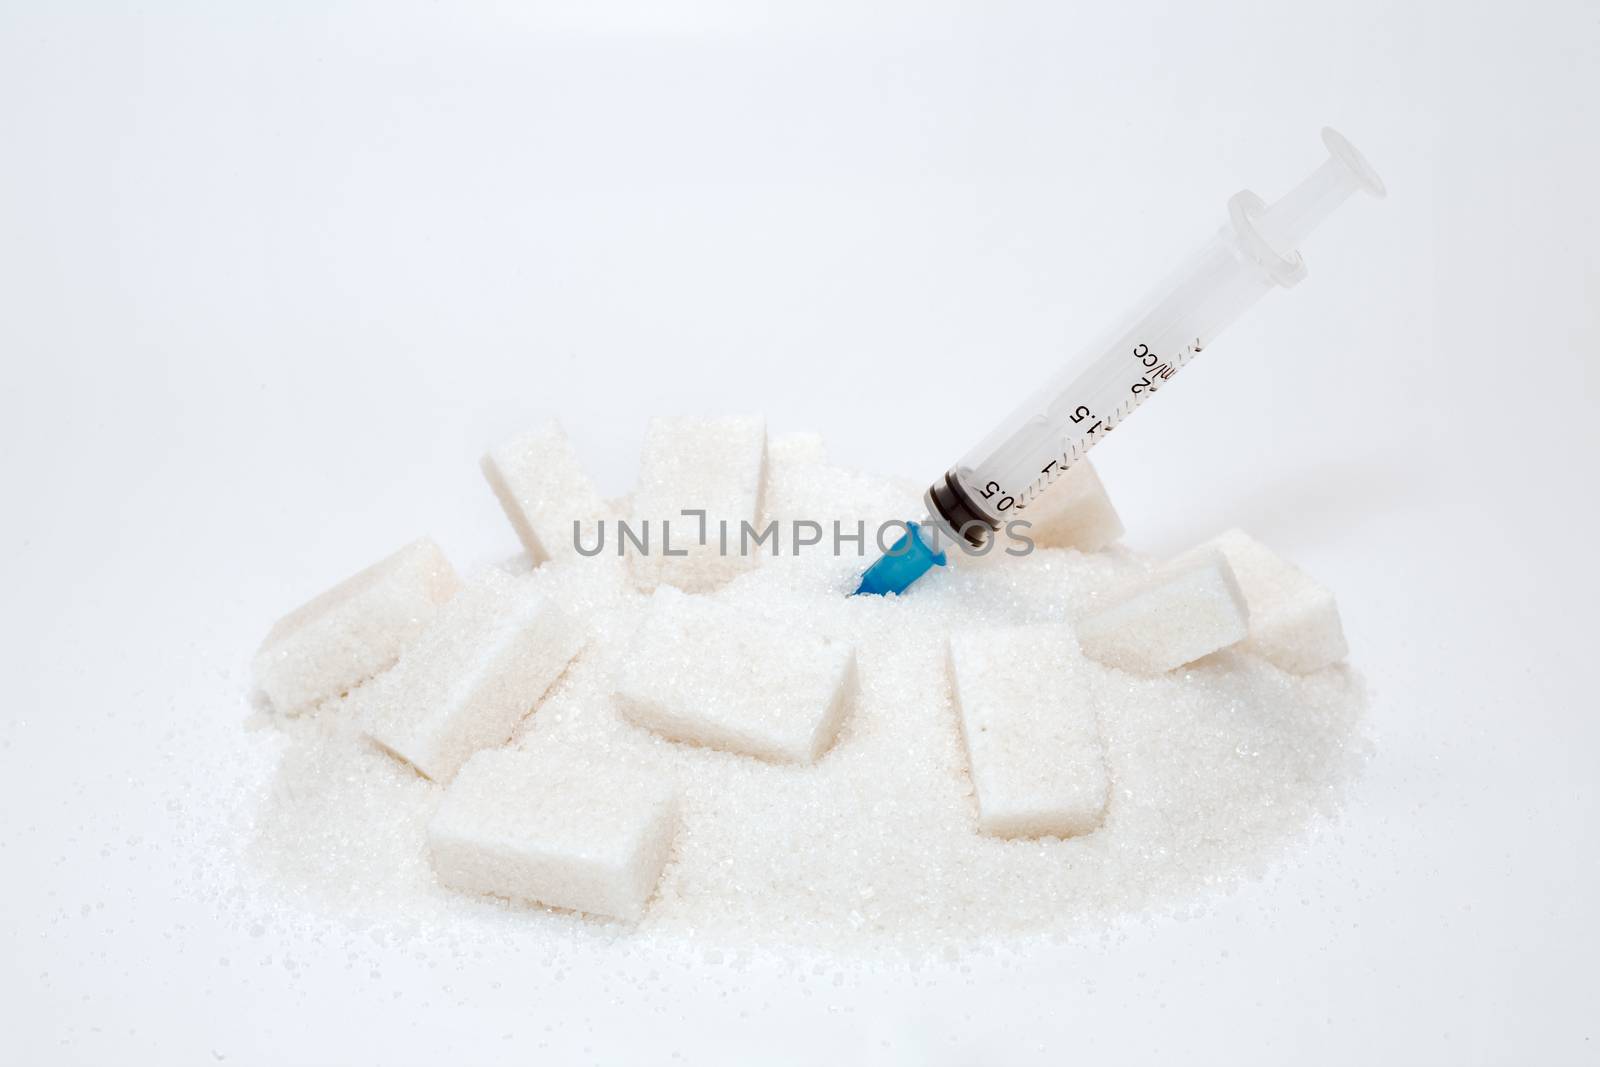 syringe with gradient force into heap of sugar